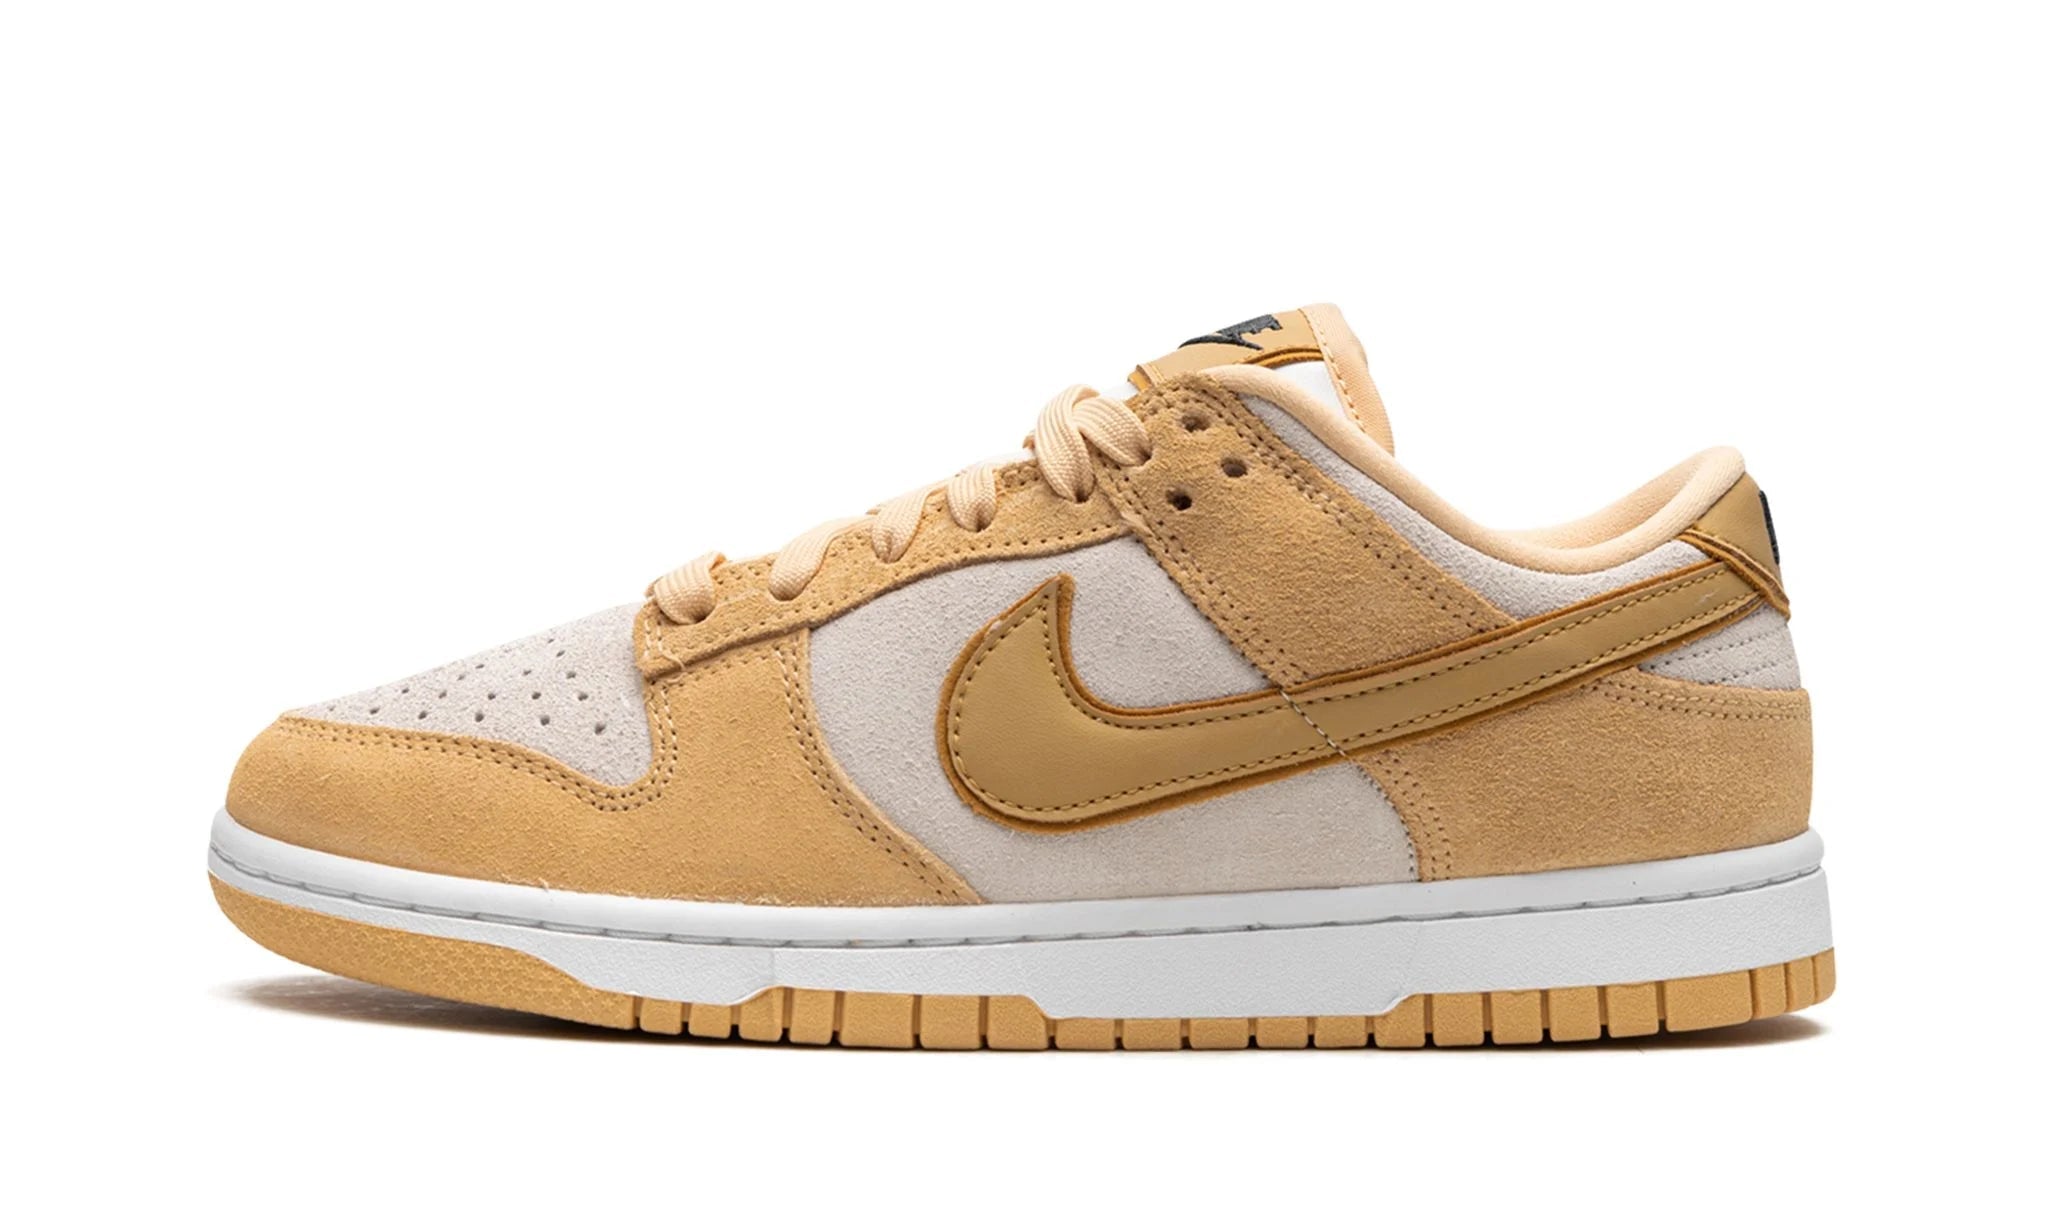 Nike Dunk Low Celestial Gold Suede - Dunk Low - Pirri